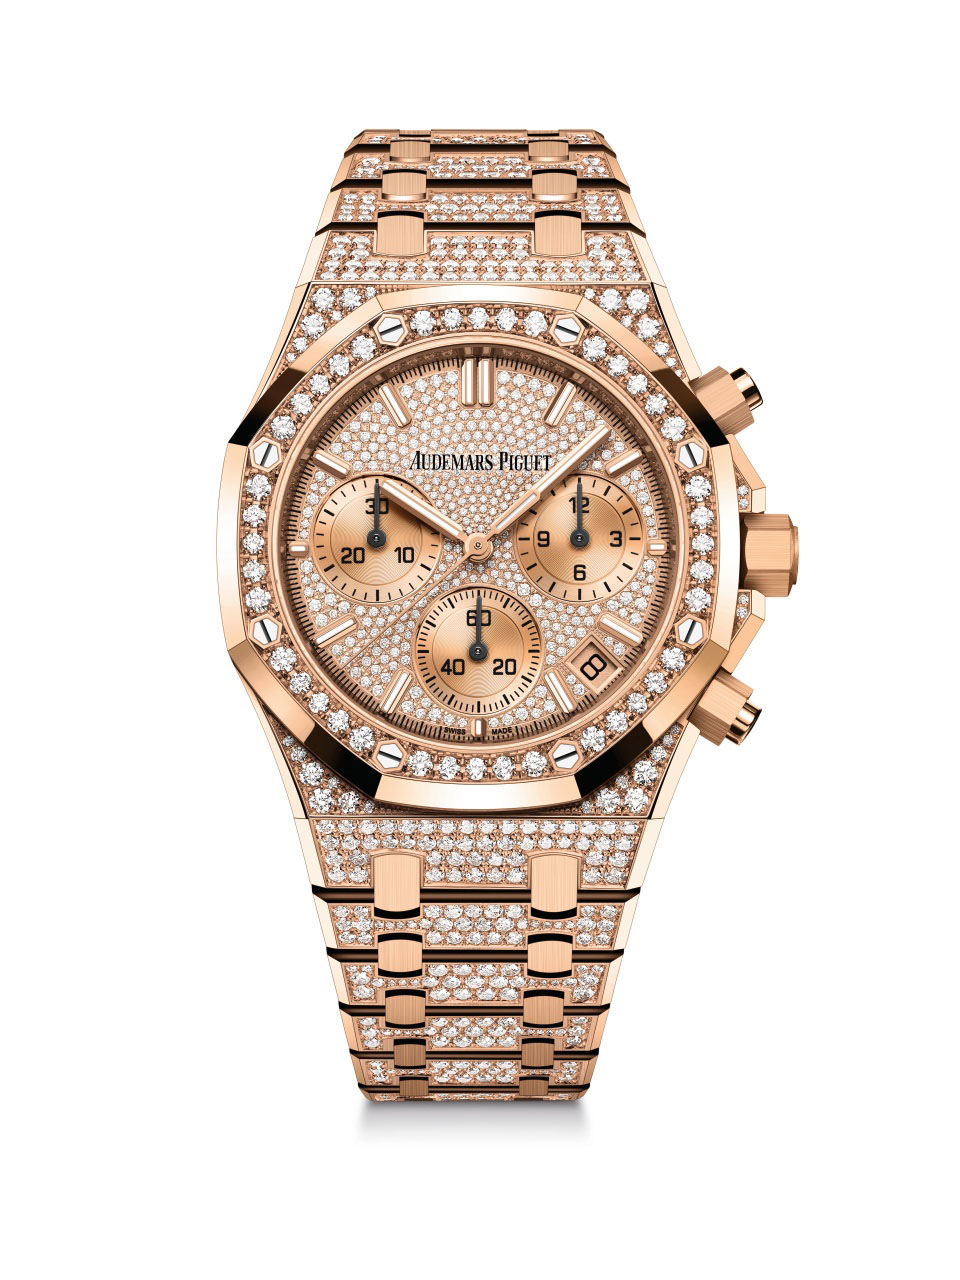 Royal Oak Selfwinding Chronograph / 41mm; 18-carat pink gold case set with brilliant-cut diamonds and 18-carat pink gold dial set with brilliant-cut diamonds (26242OR.ZZ.1322OR.01)